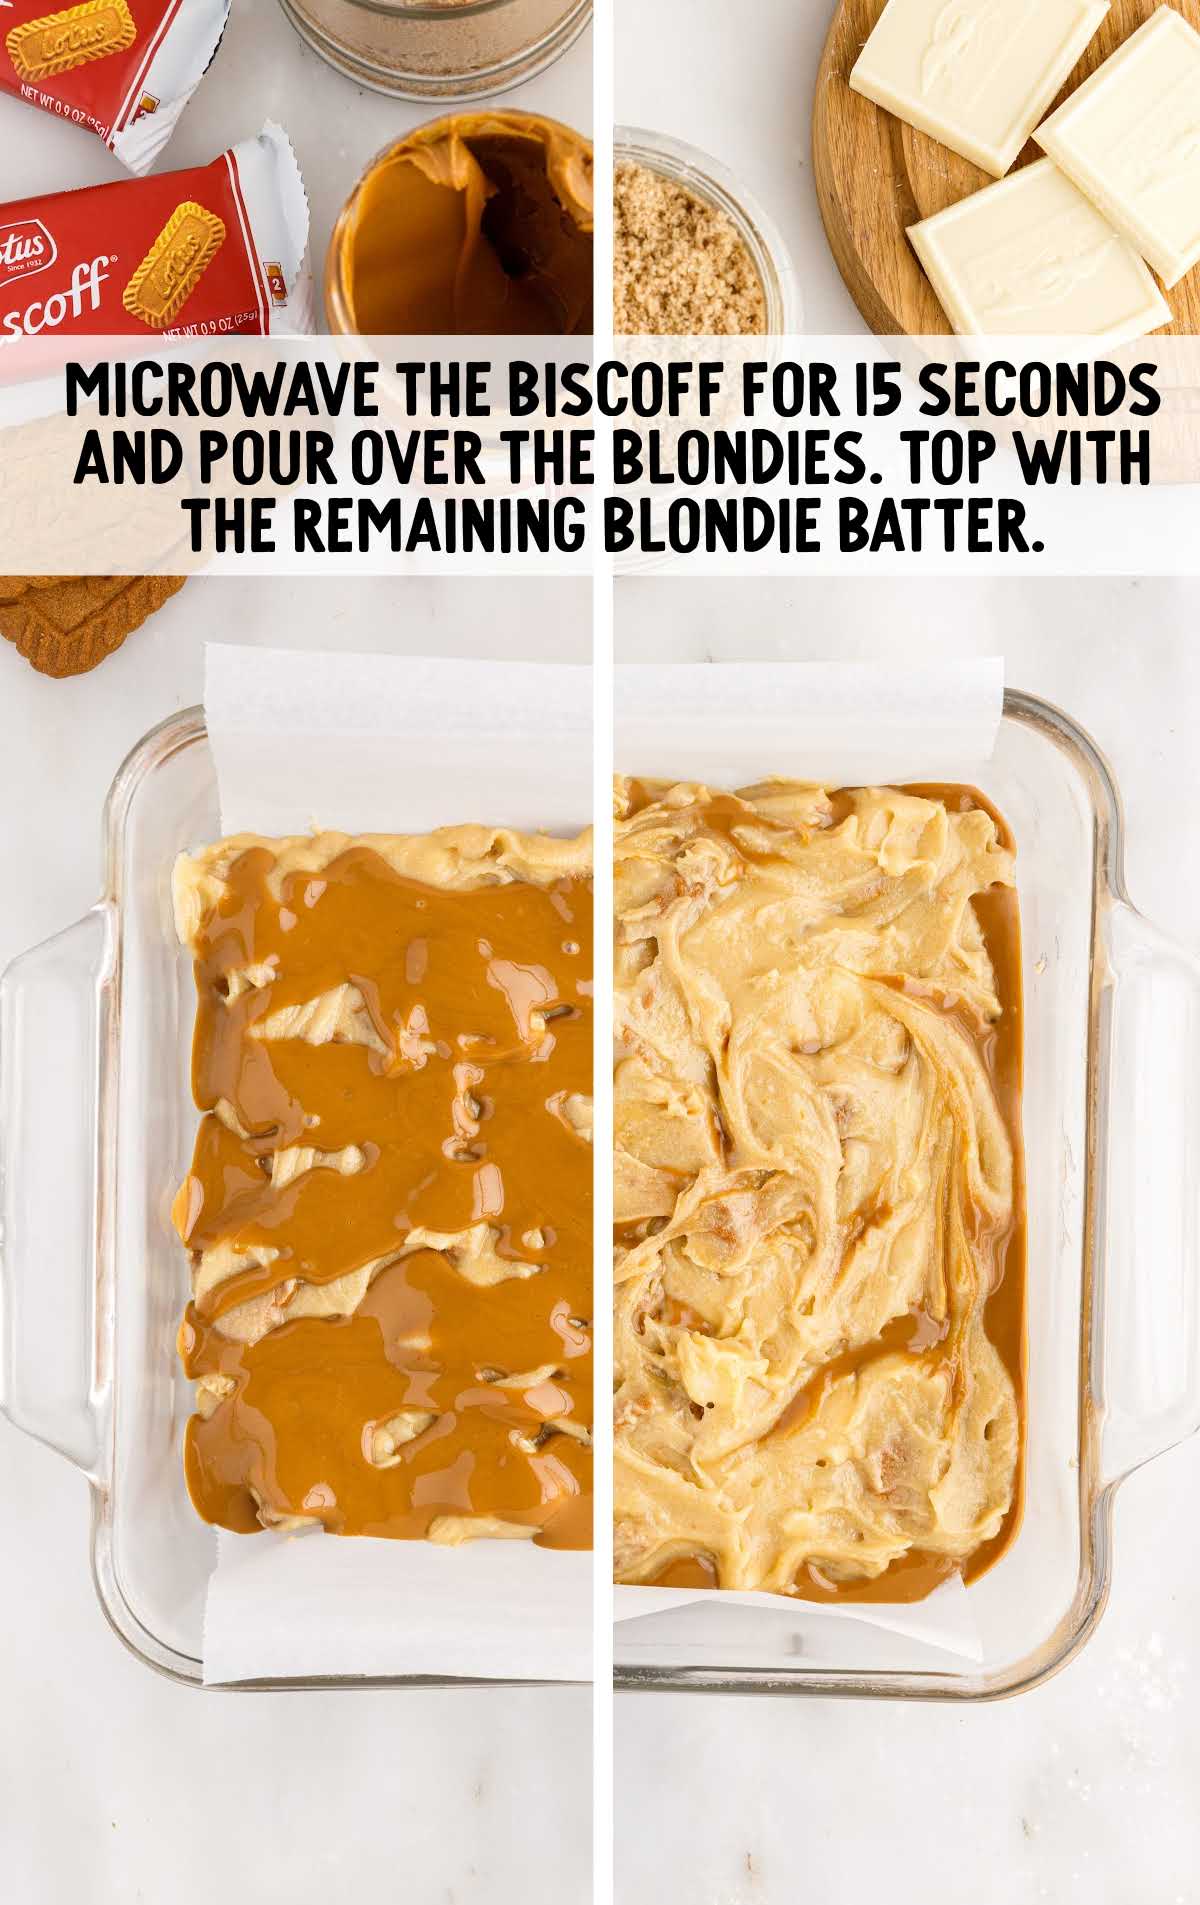 biscoff microwaved and blondies poured over